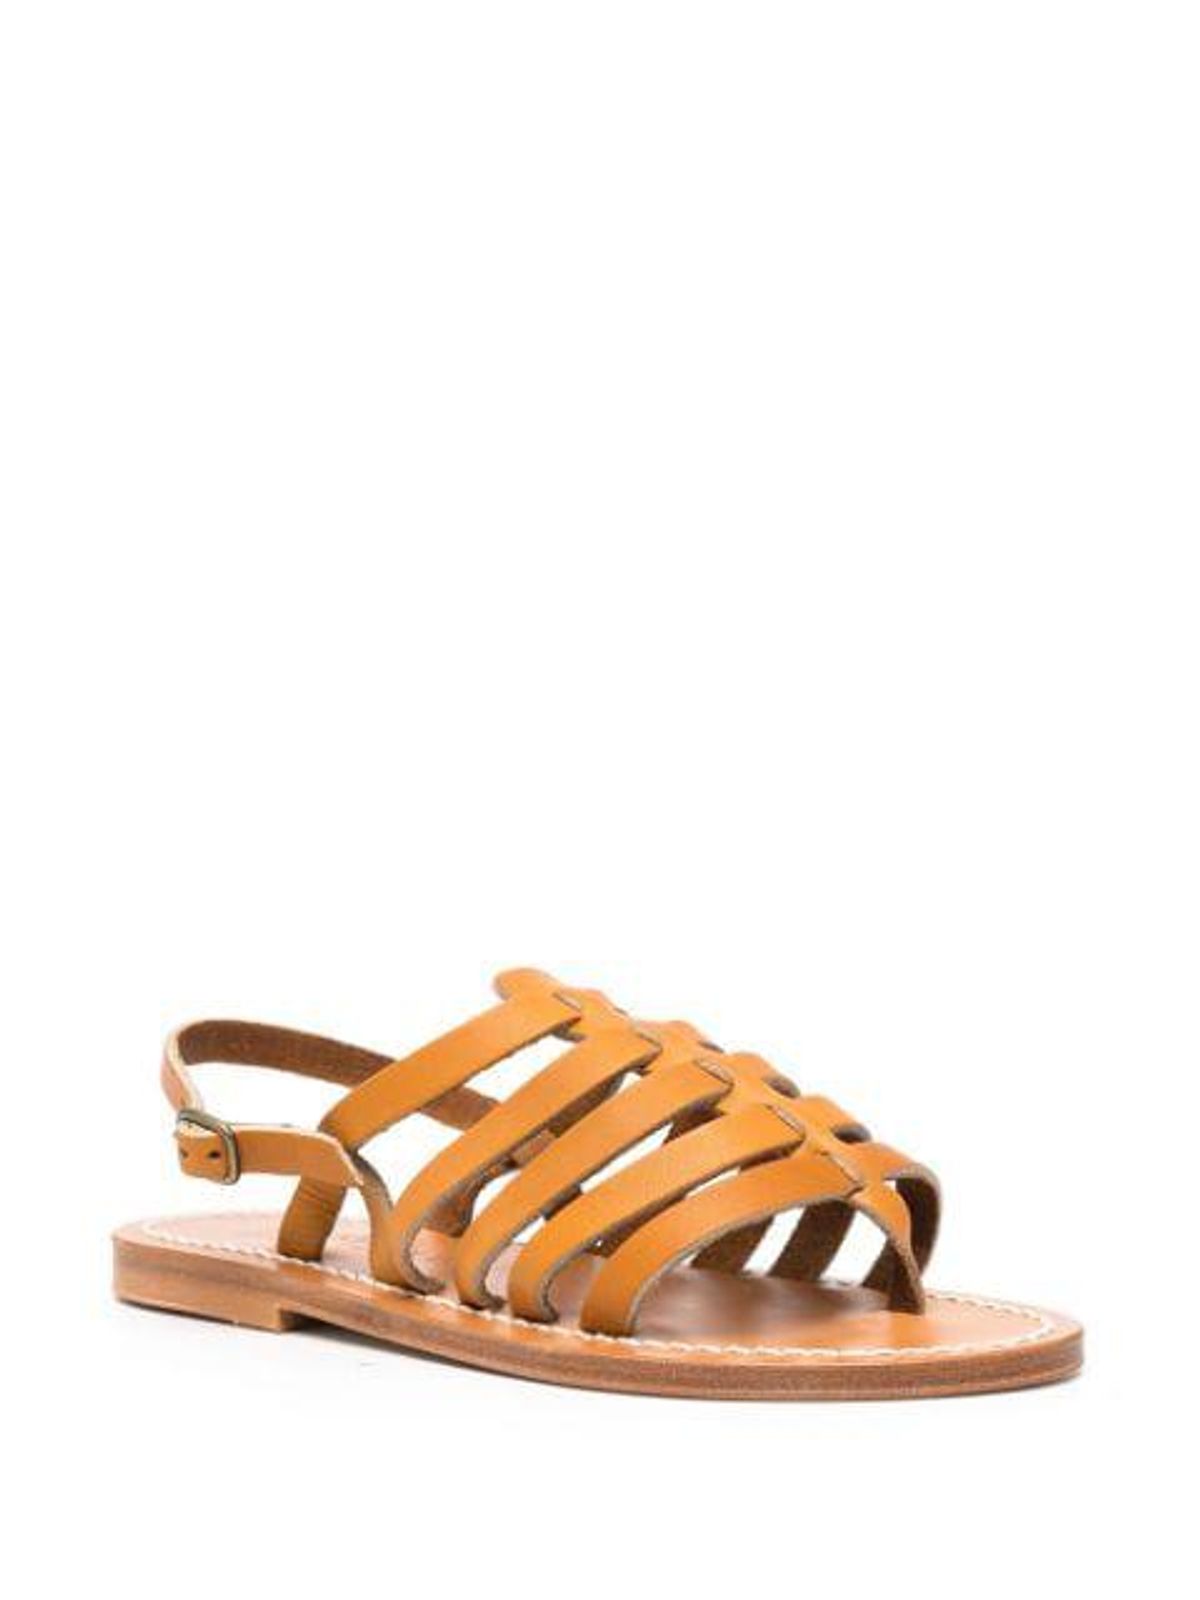 Homere Leather Sandals